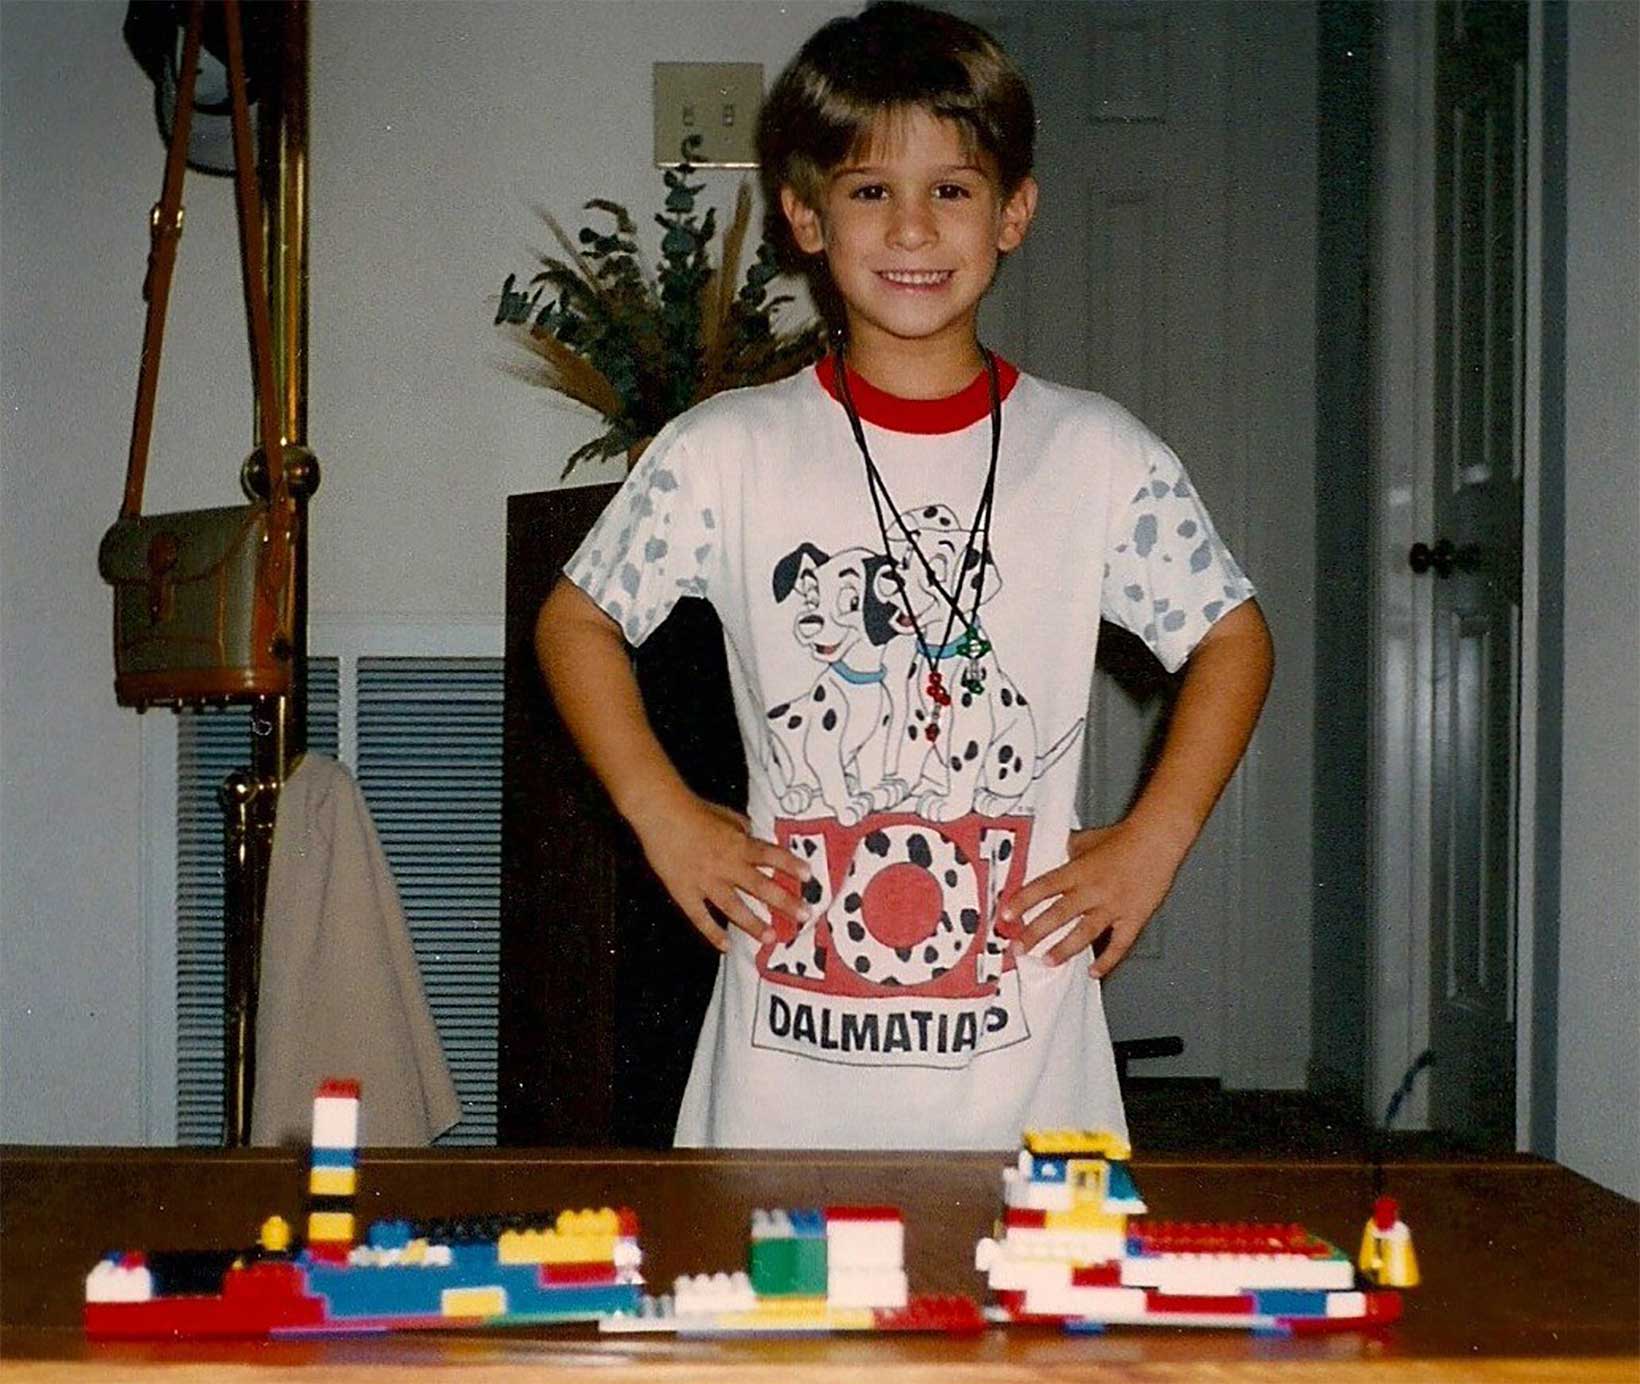 Tristan Mace as a young child with Legos